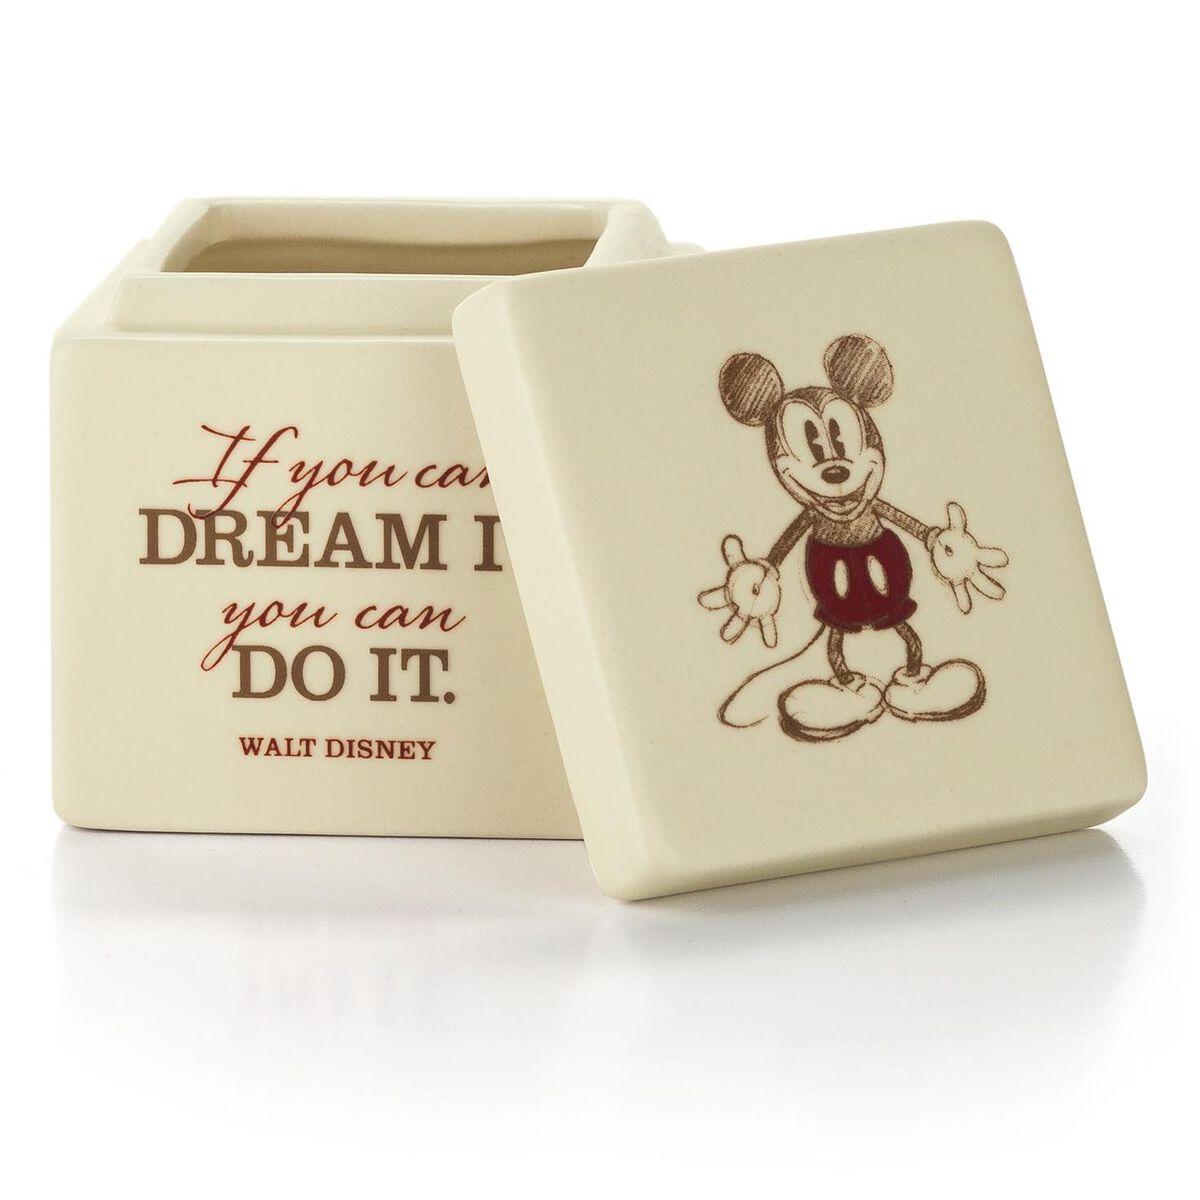 Disney Mickey "If You Can Dream It You Can Do It" Ceramic Box, 2.25"